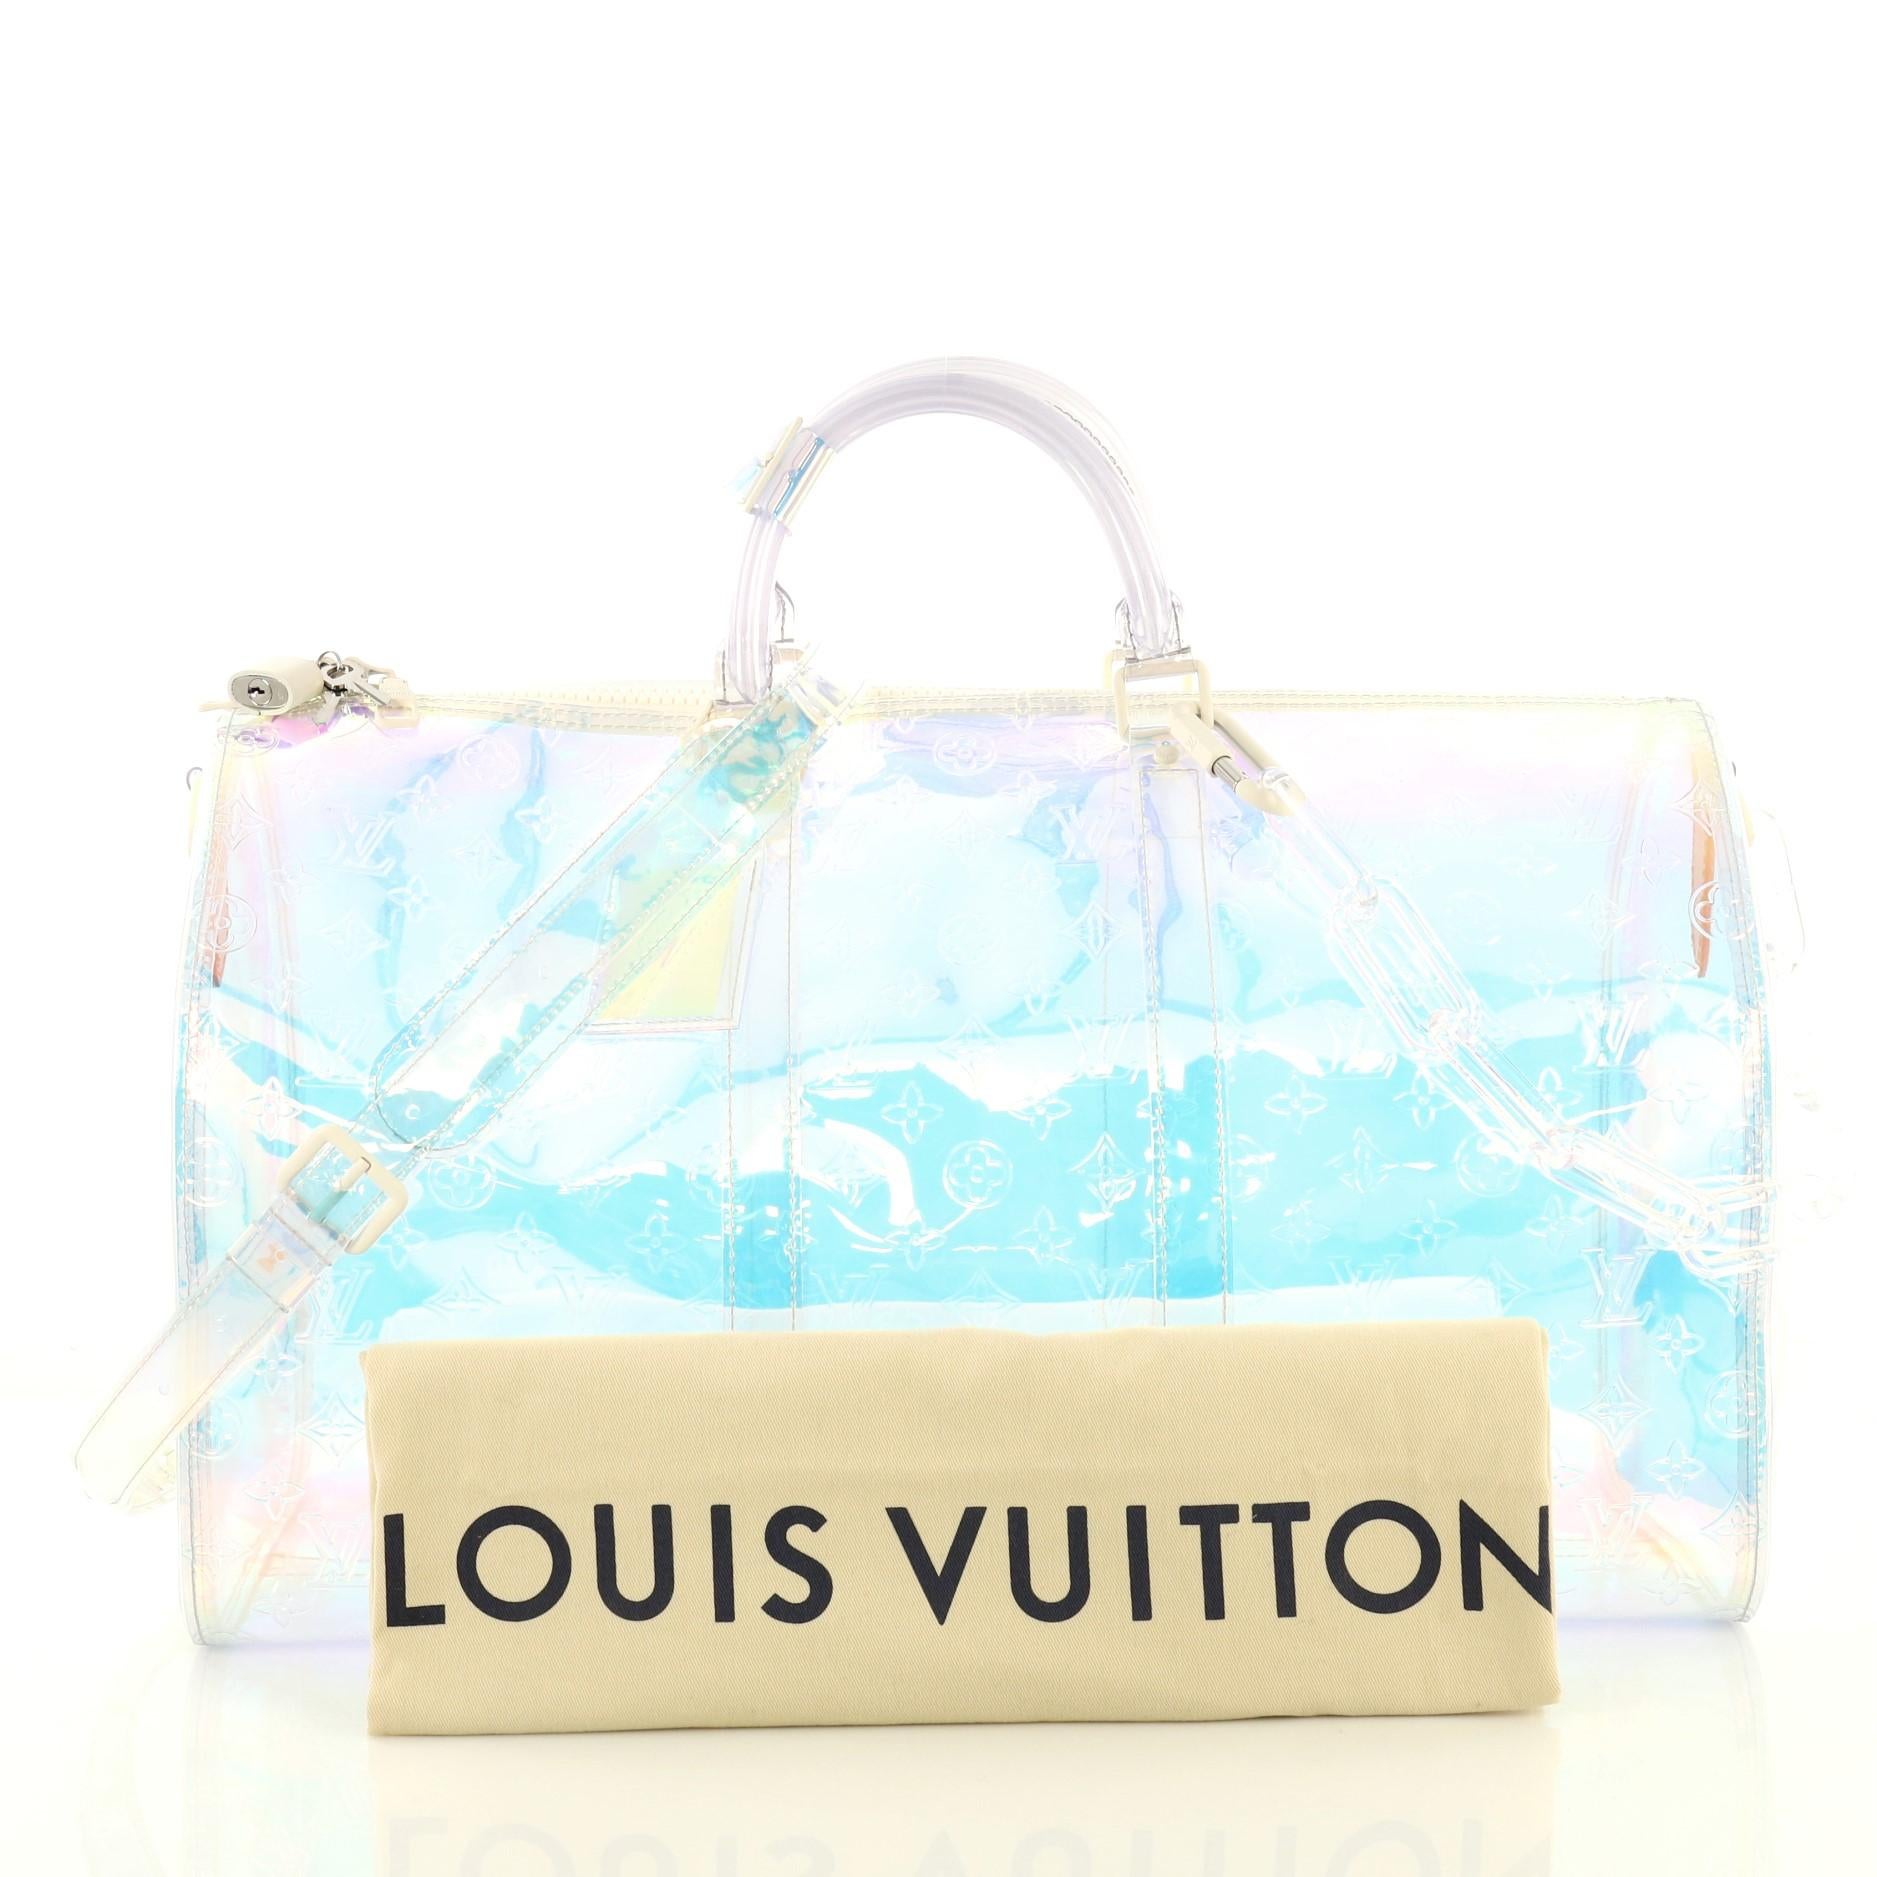 This Louis Vuitton Keepall Bandouliere Bag Limited Edition Monogram Prism PVC 50, crafted in clear monogram prism PVC, features dual rolled handles, resin chain, and silver-tone hardware. Its zip closure opens to a multicolor and clear monogram